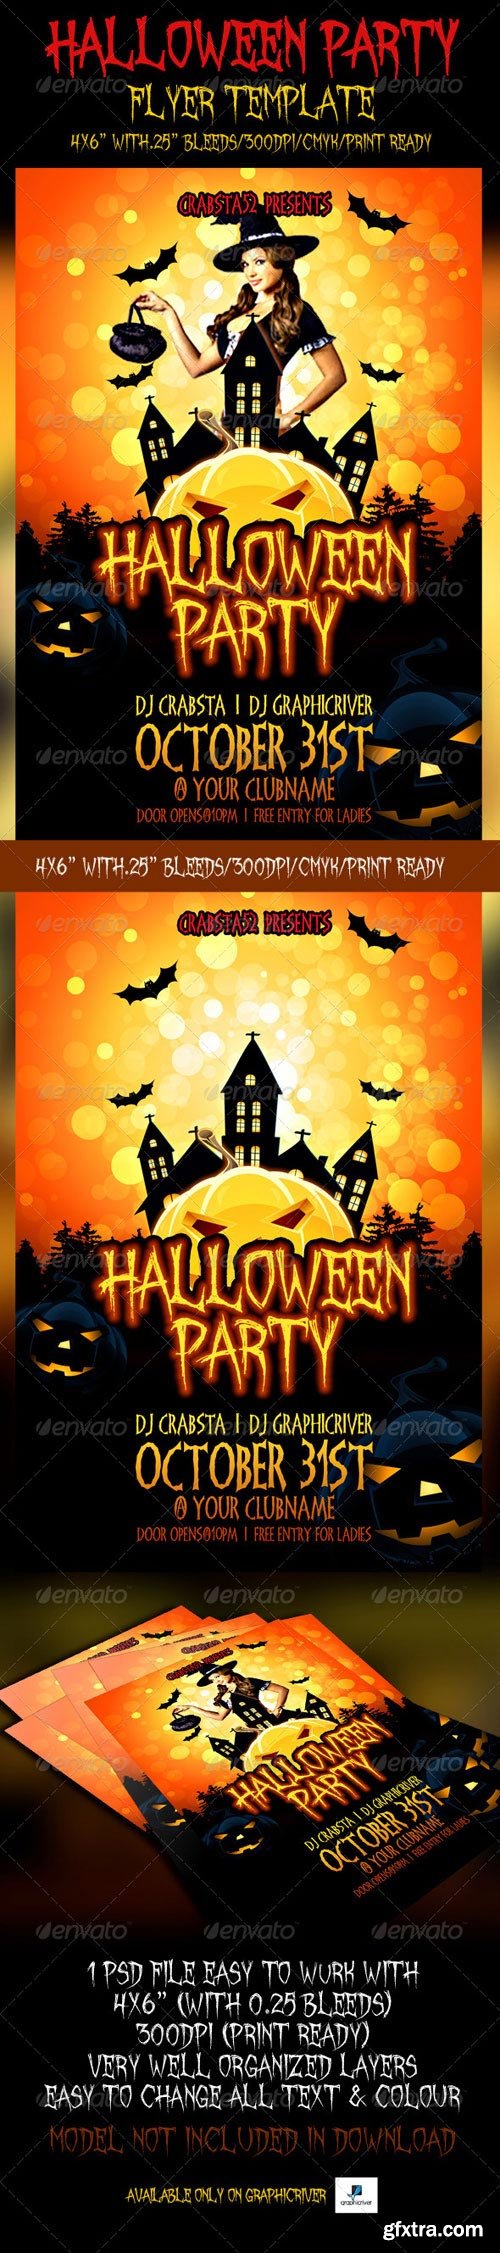 GraphicRiver - Halloween Party Flyer Template 5341657